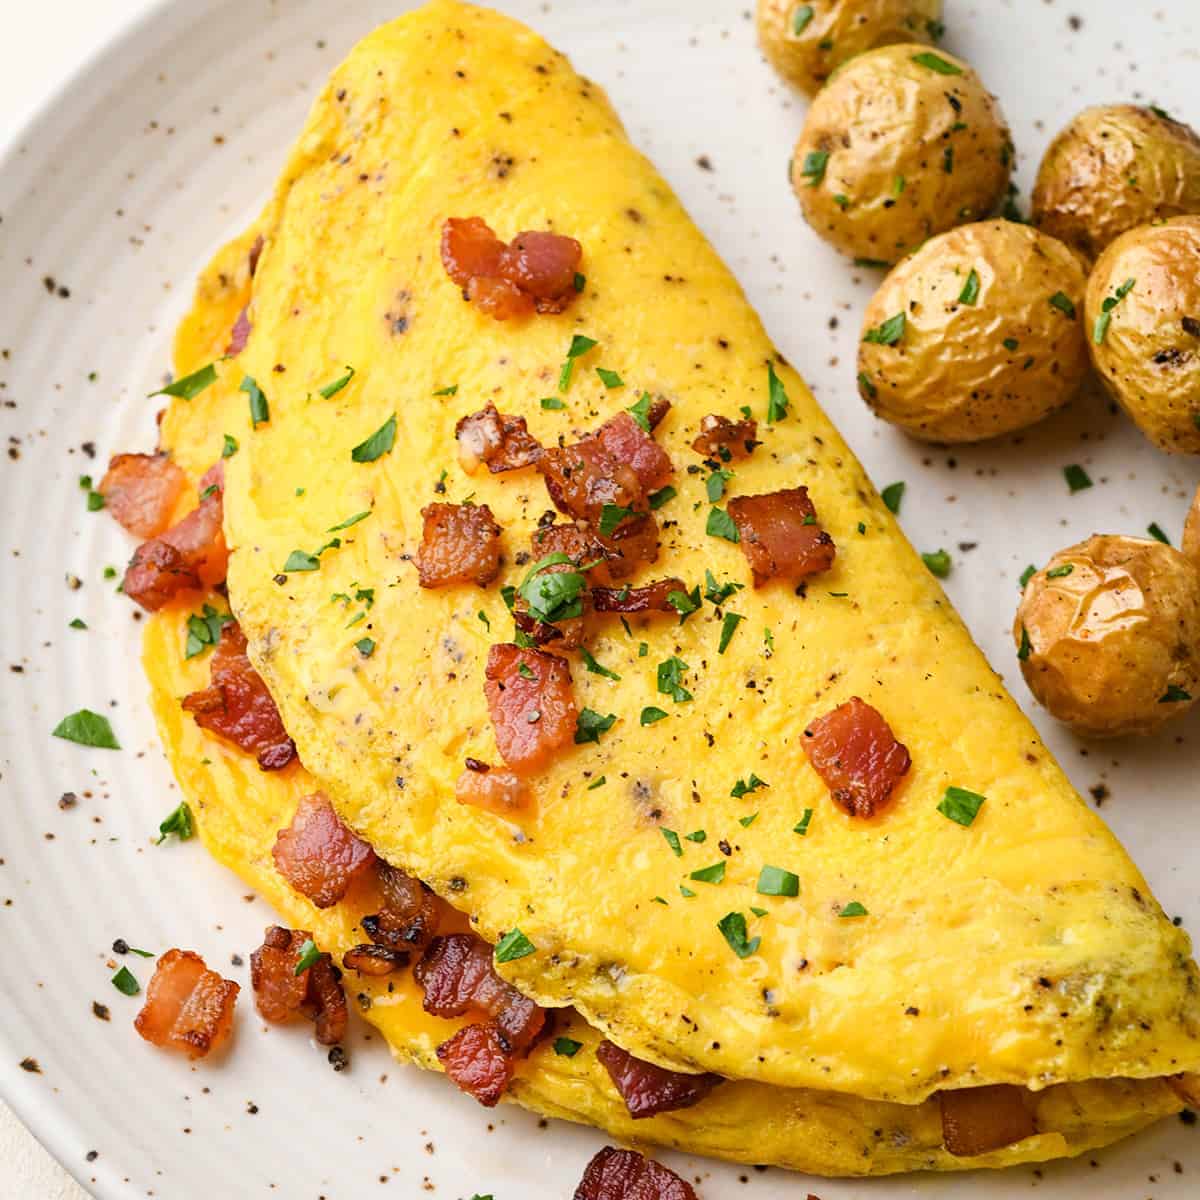 A high protein omelet with bacon and potatoes on a plate.